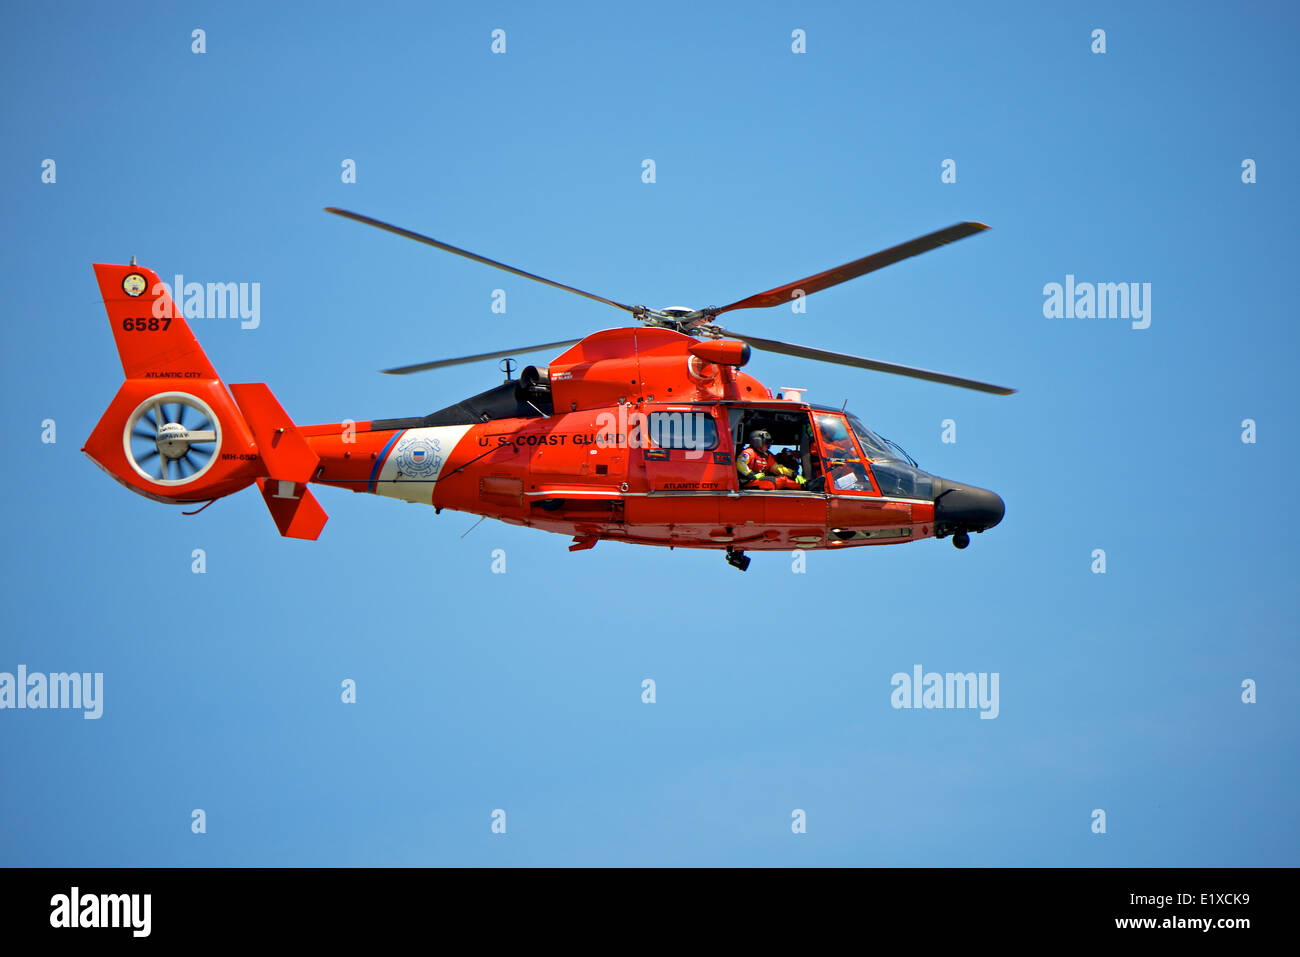 US Coast Guard Helicopter Stock Photo